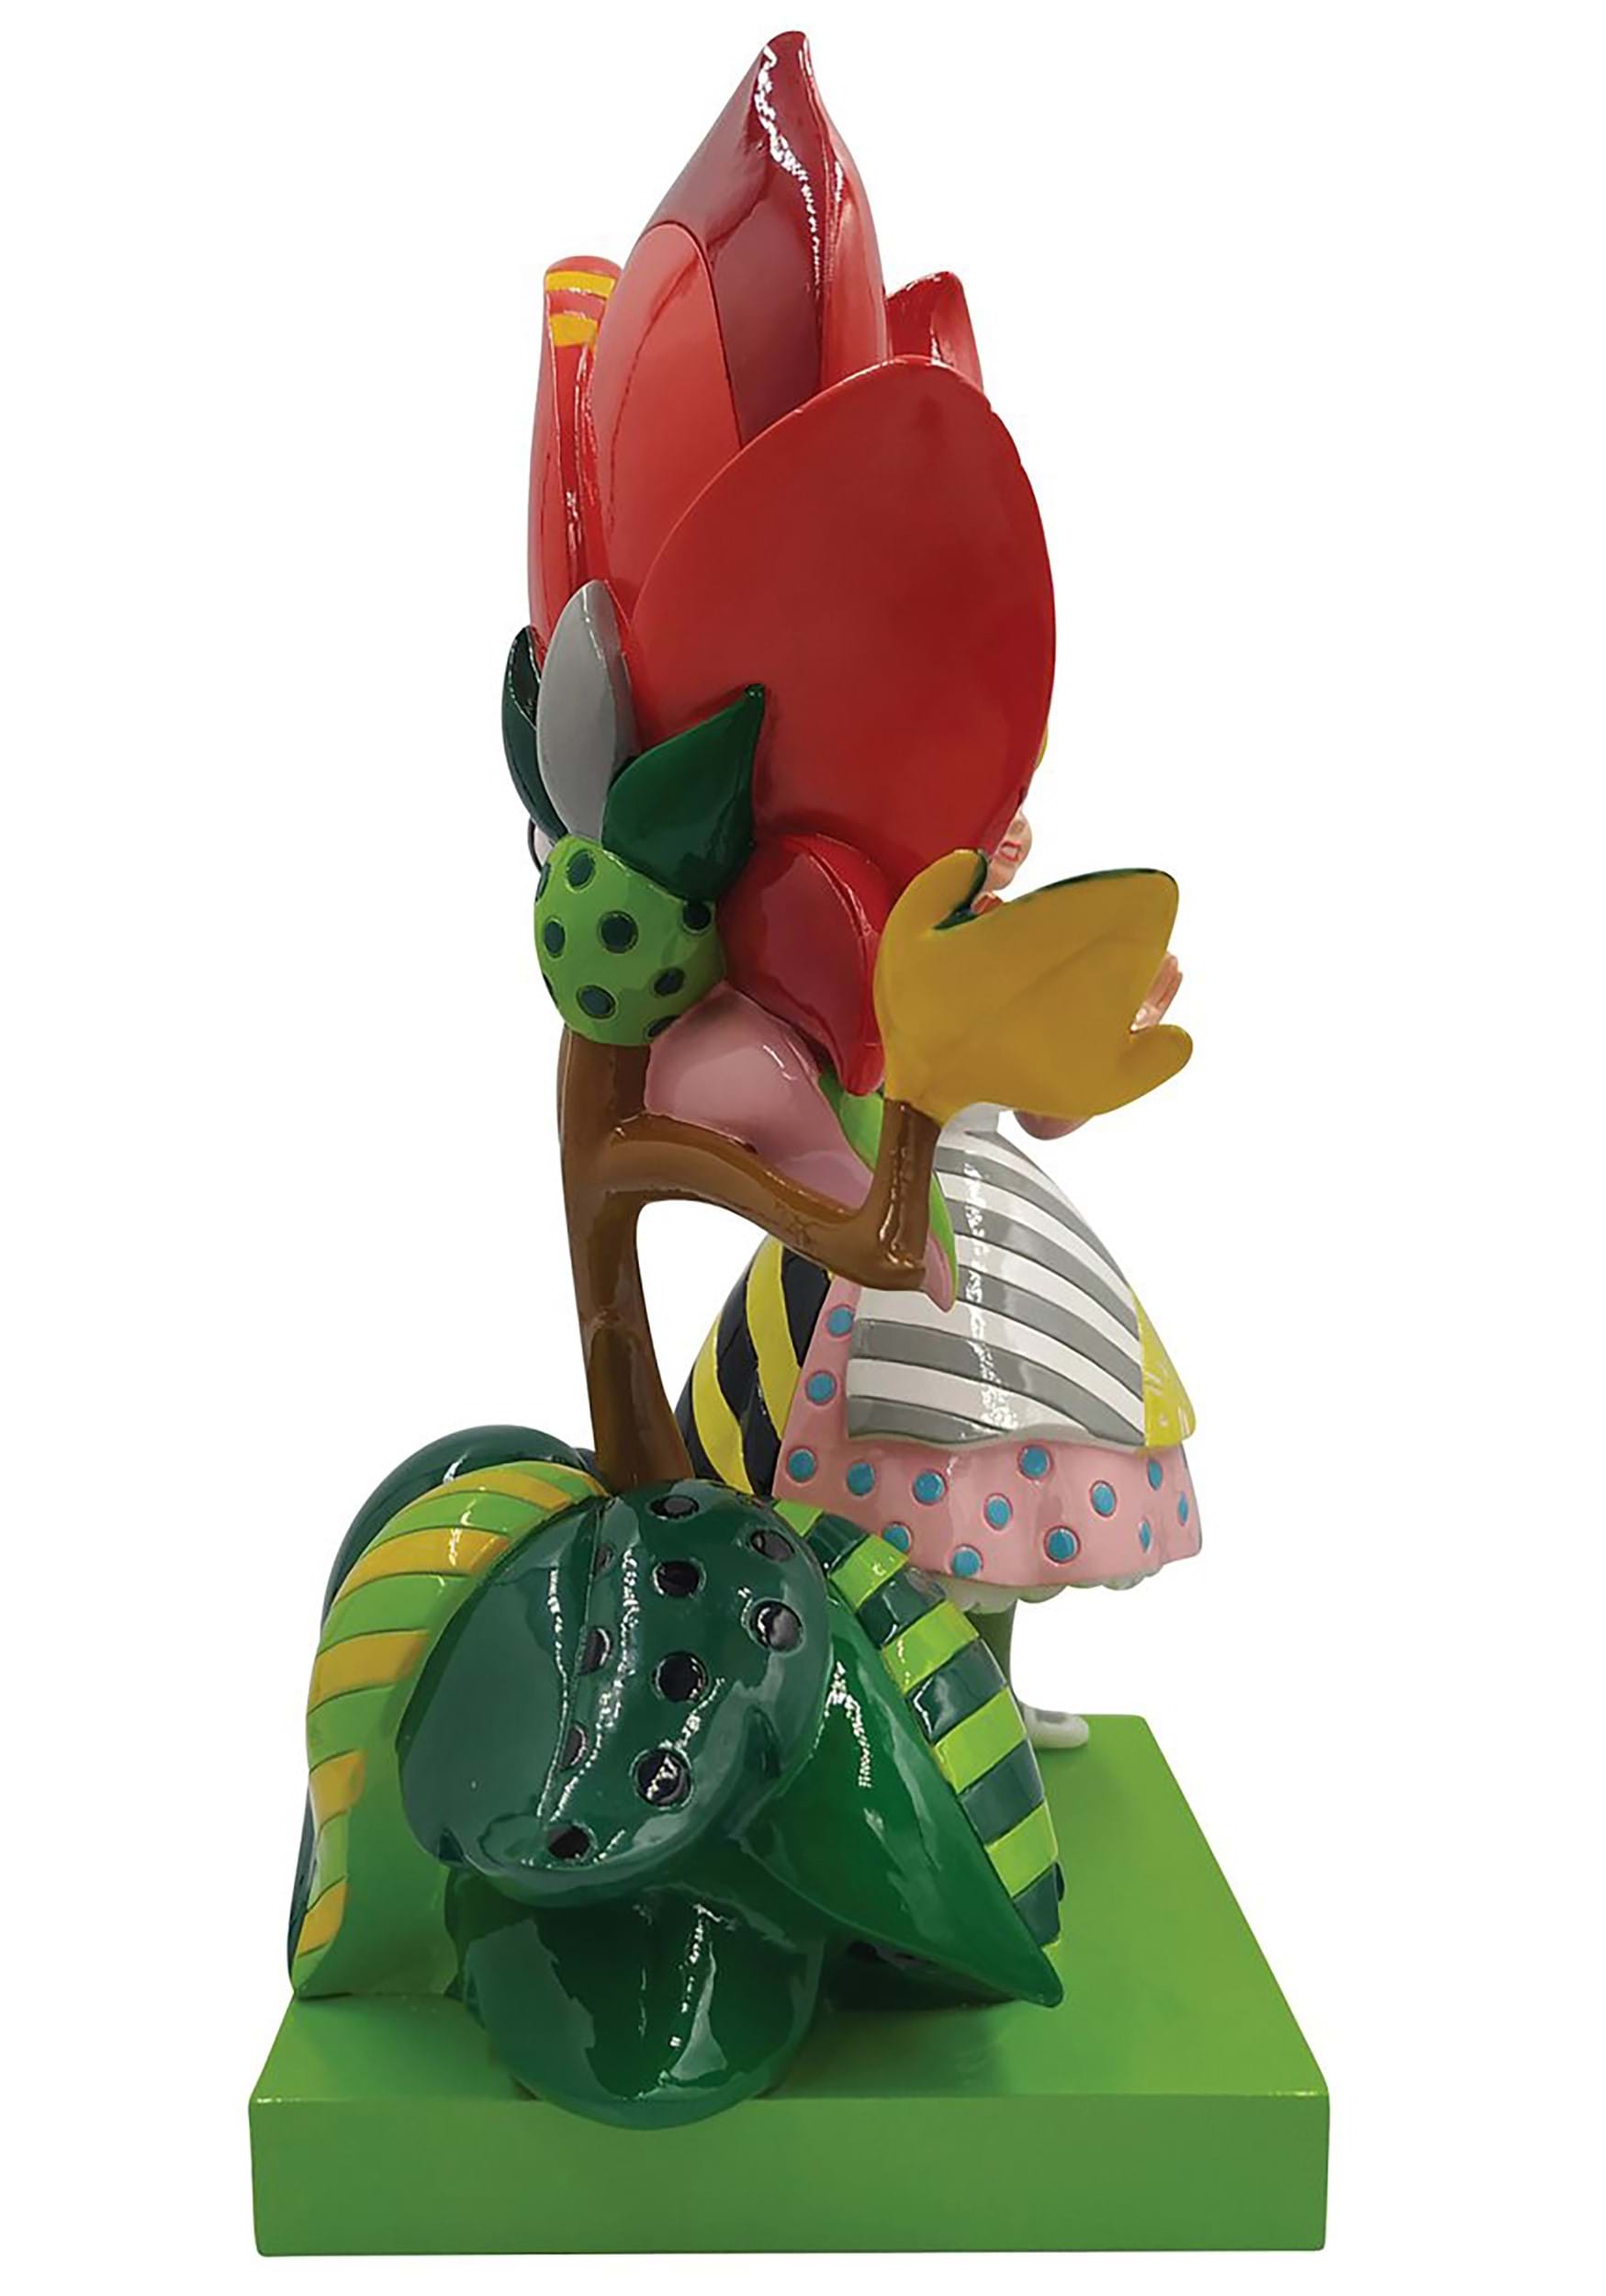 Alice and Rose Figure by Britto – Alice in Wonderland